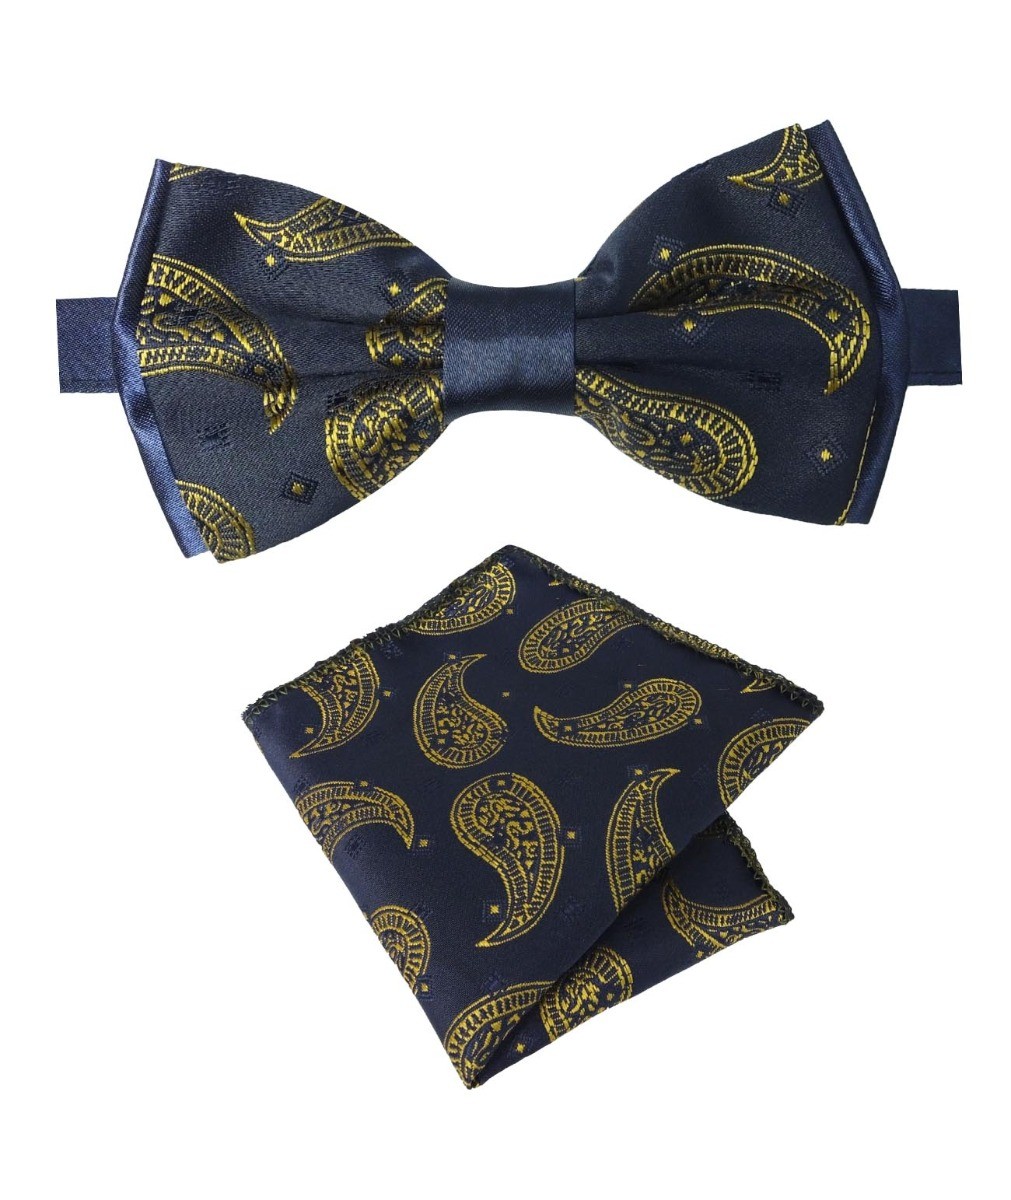 Boys & Men's Paisley Bow Tie and Hanky Set - Navy Blue and Gold